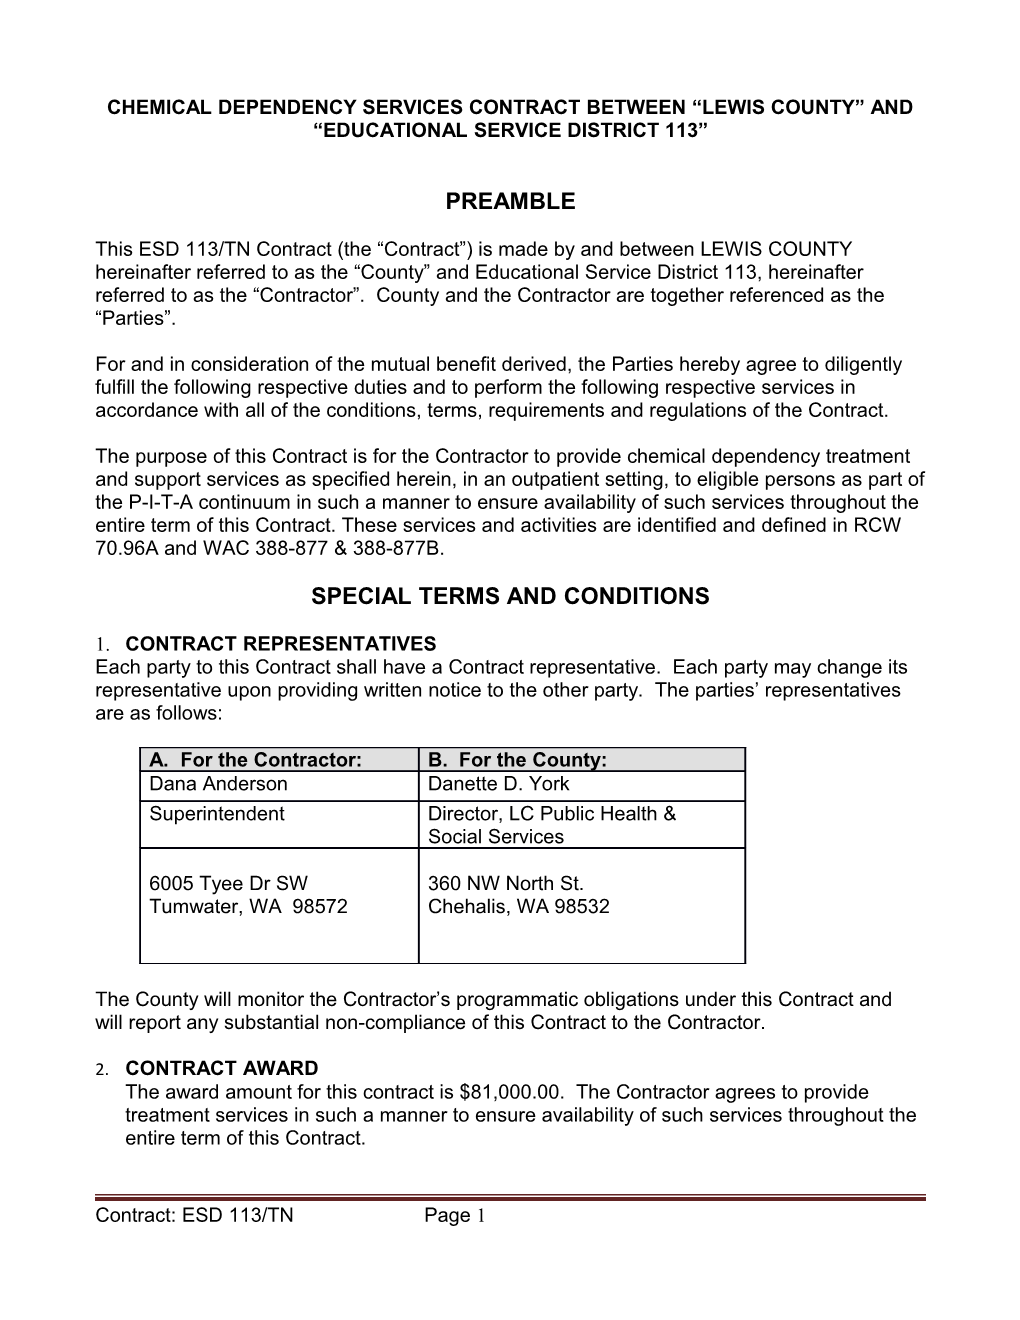 Chemical Dependency Services Contract Between Lewis County and Educational Service District